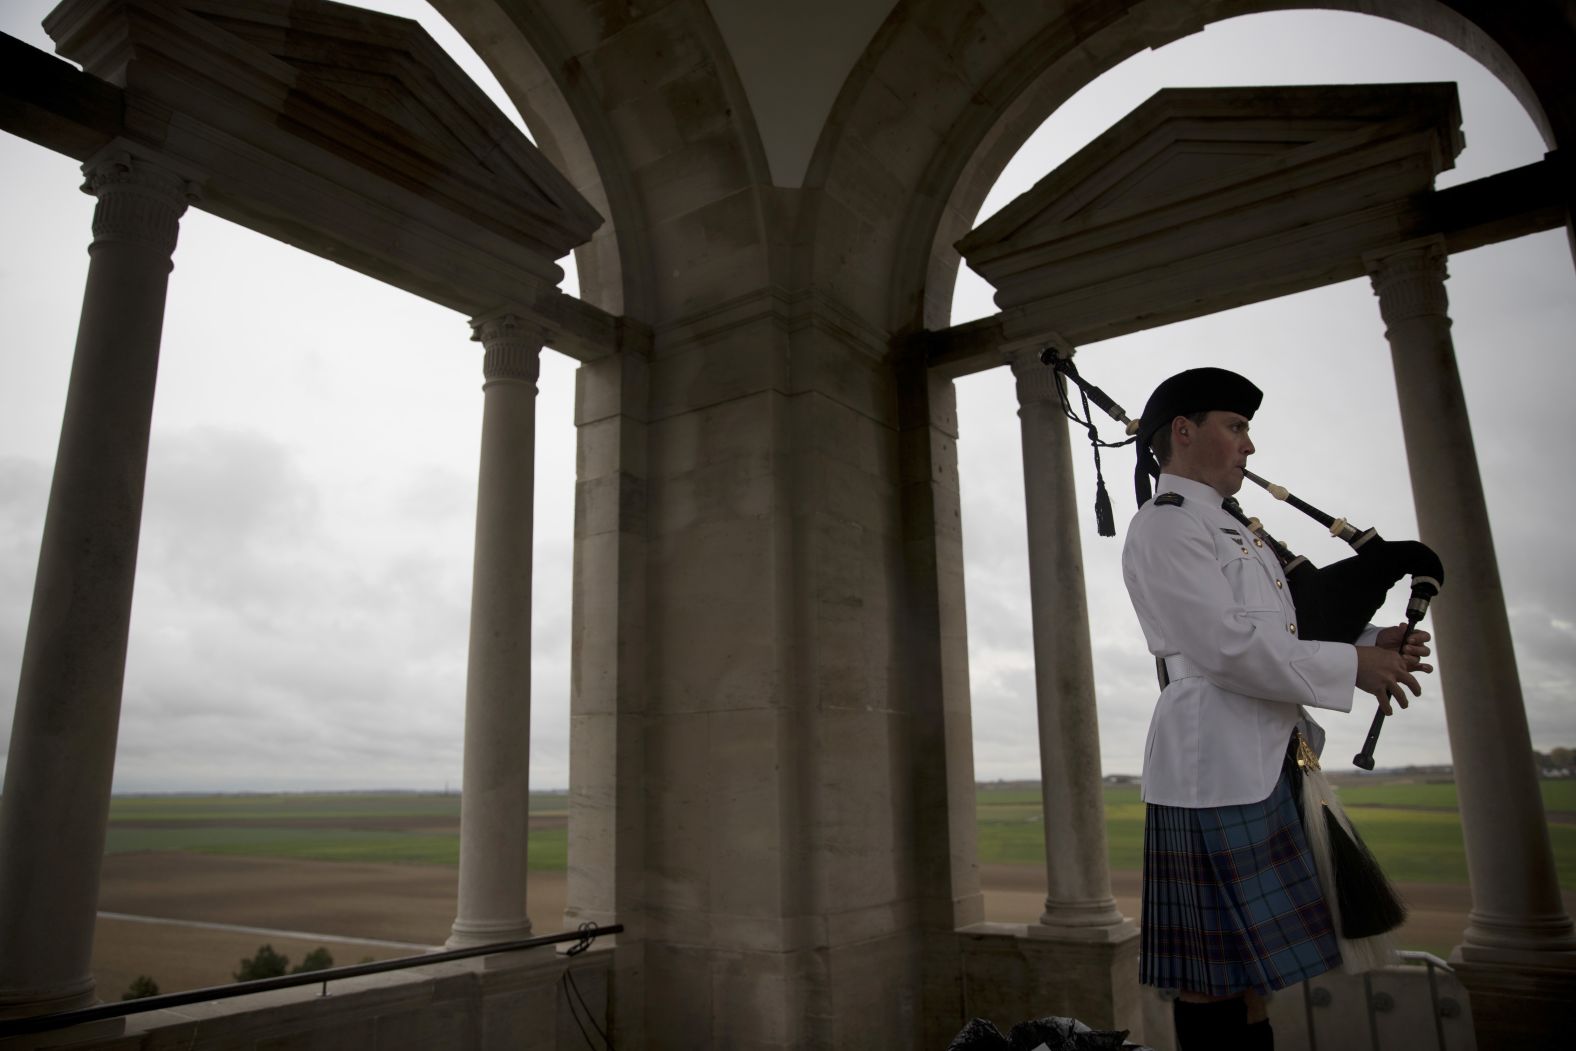 A bagpiper plays from the tower of the World War I Australian National Memorial in Villers-Bretonneux, France on November 10. The memorial walls at the site bear the names of 11,000 Australian soldiers who died in France during the war.